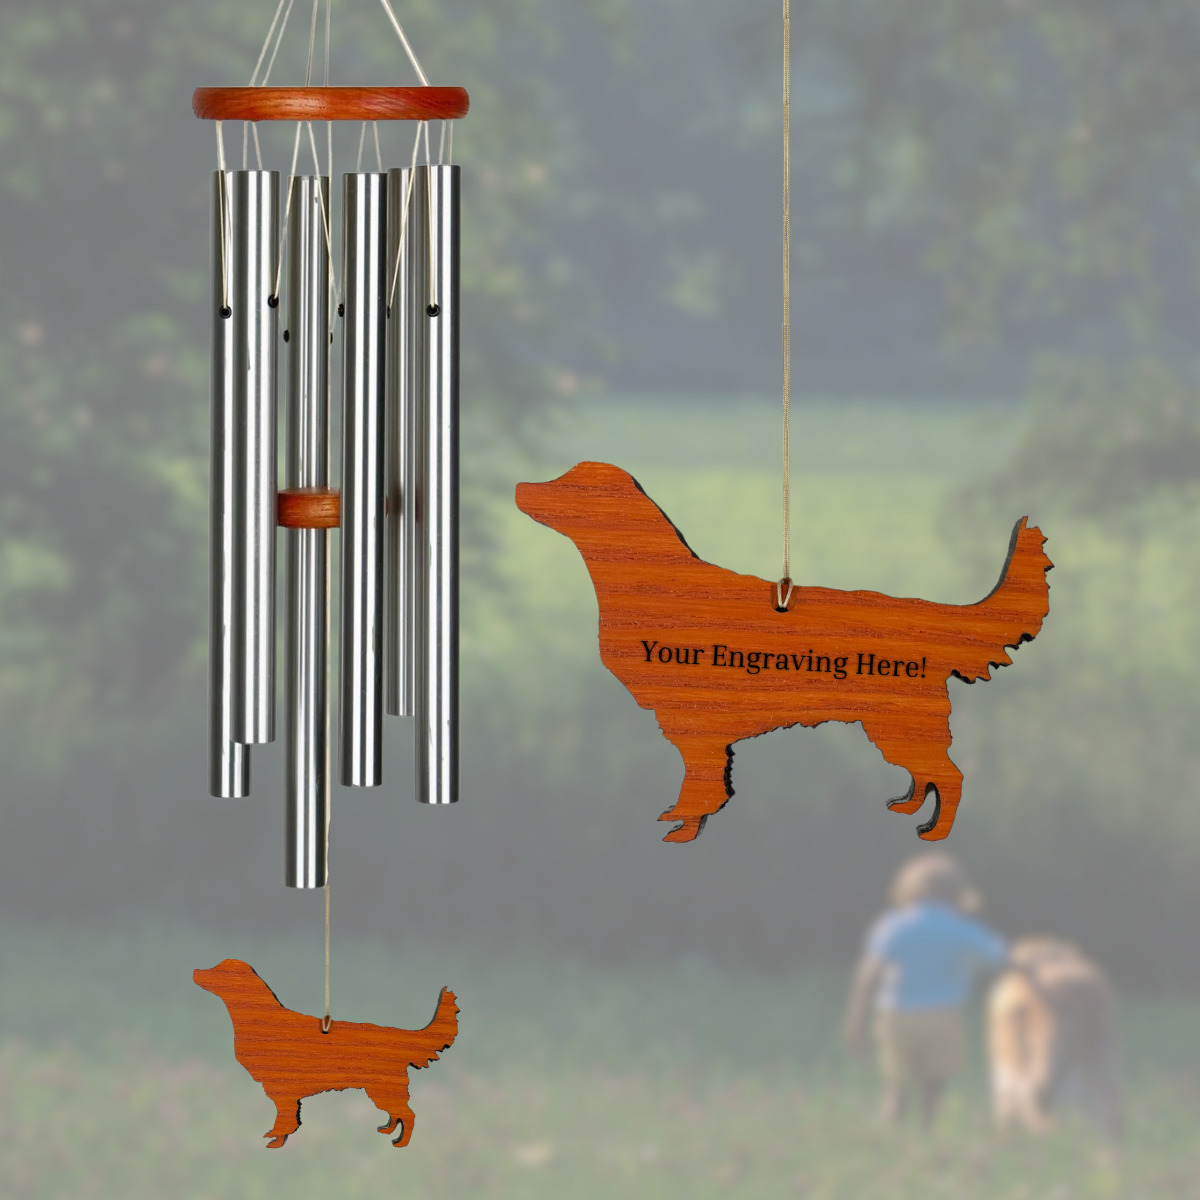 Amazing Grace 25 Inch Wind Chime - Engravable Dog Sail - Silver